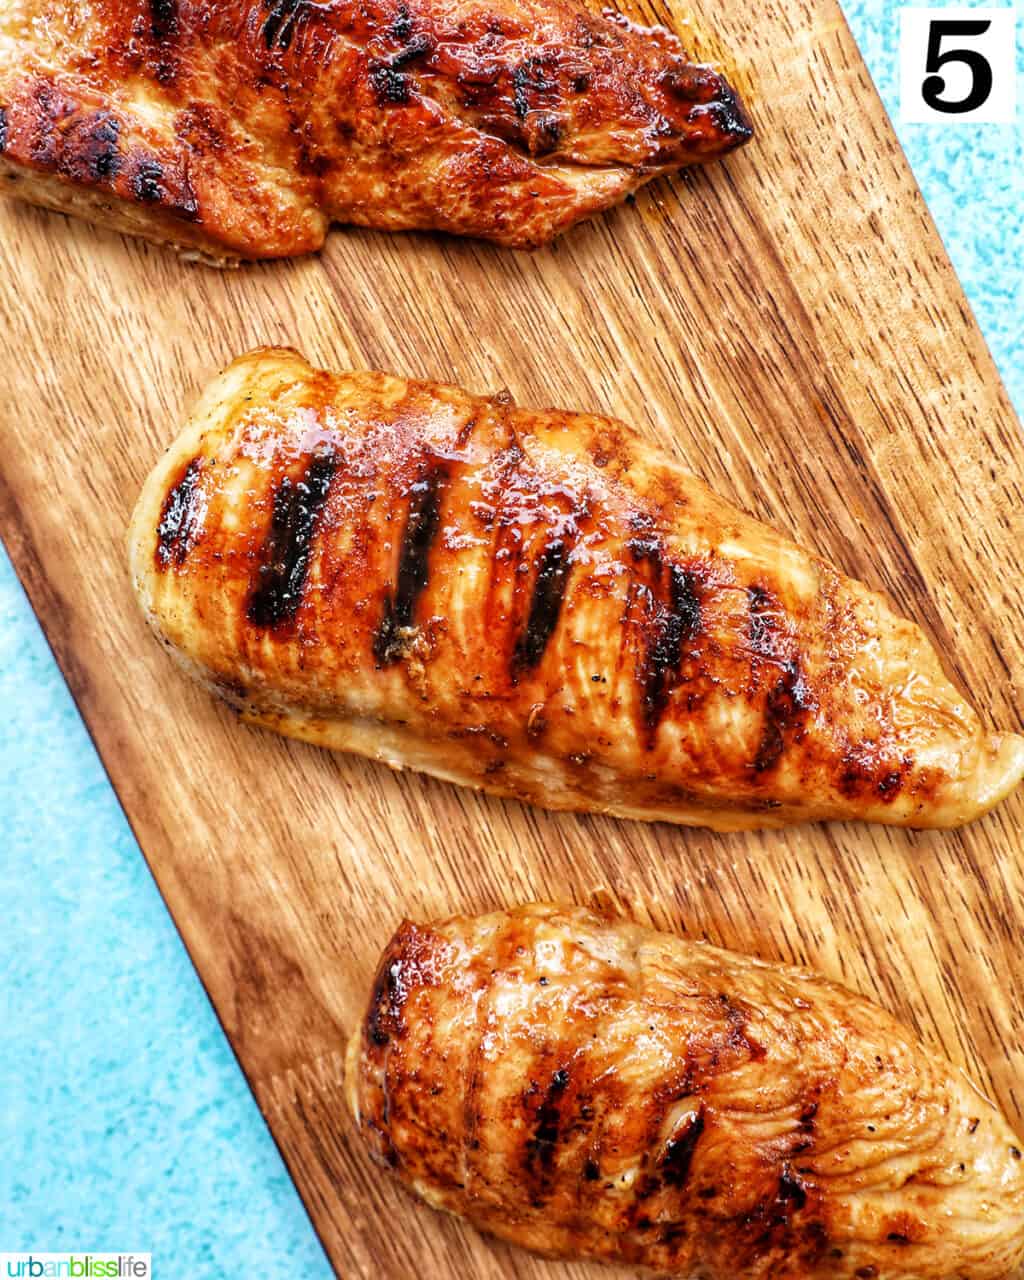 three grilled teriyaki chicken breasts on a wooden board with blue background.